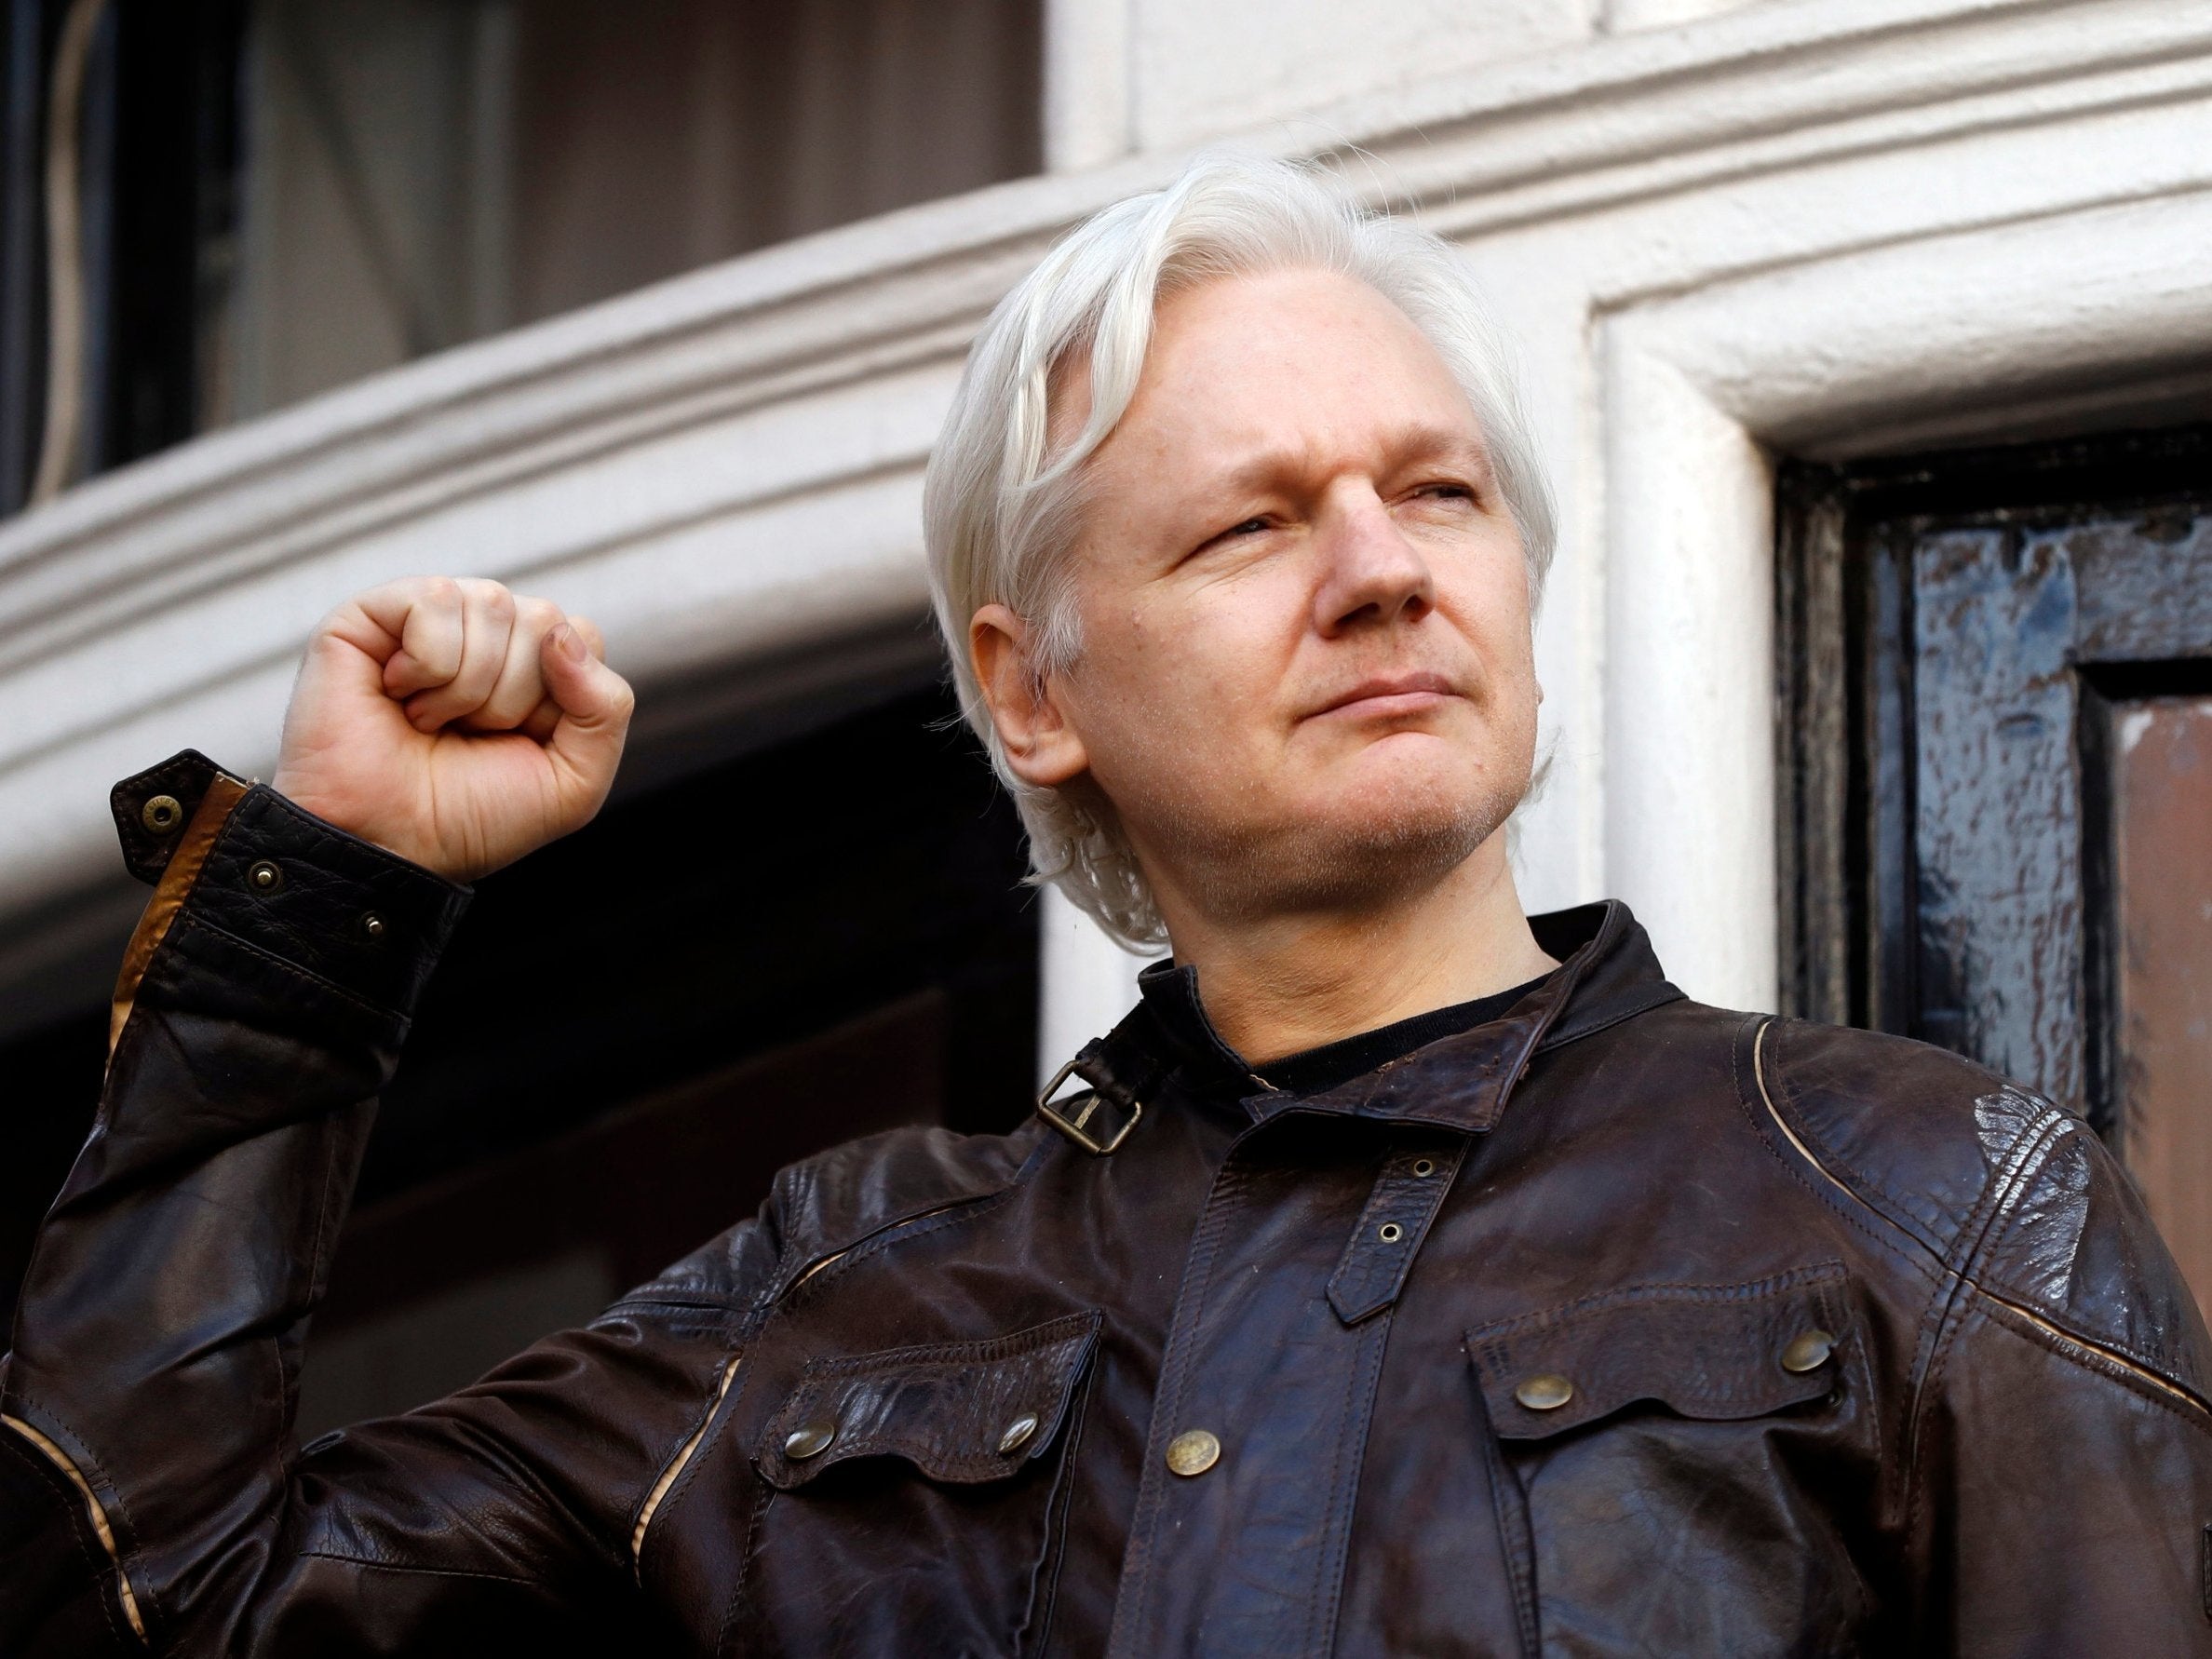 Ecuador attempted to move Julian Assange to Moscow embassy, documents reveal